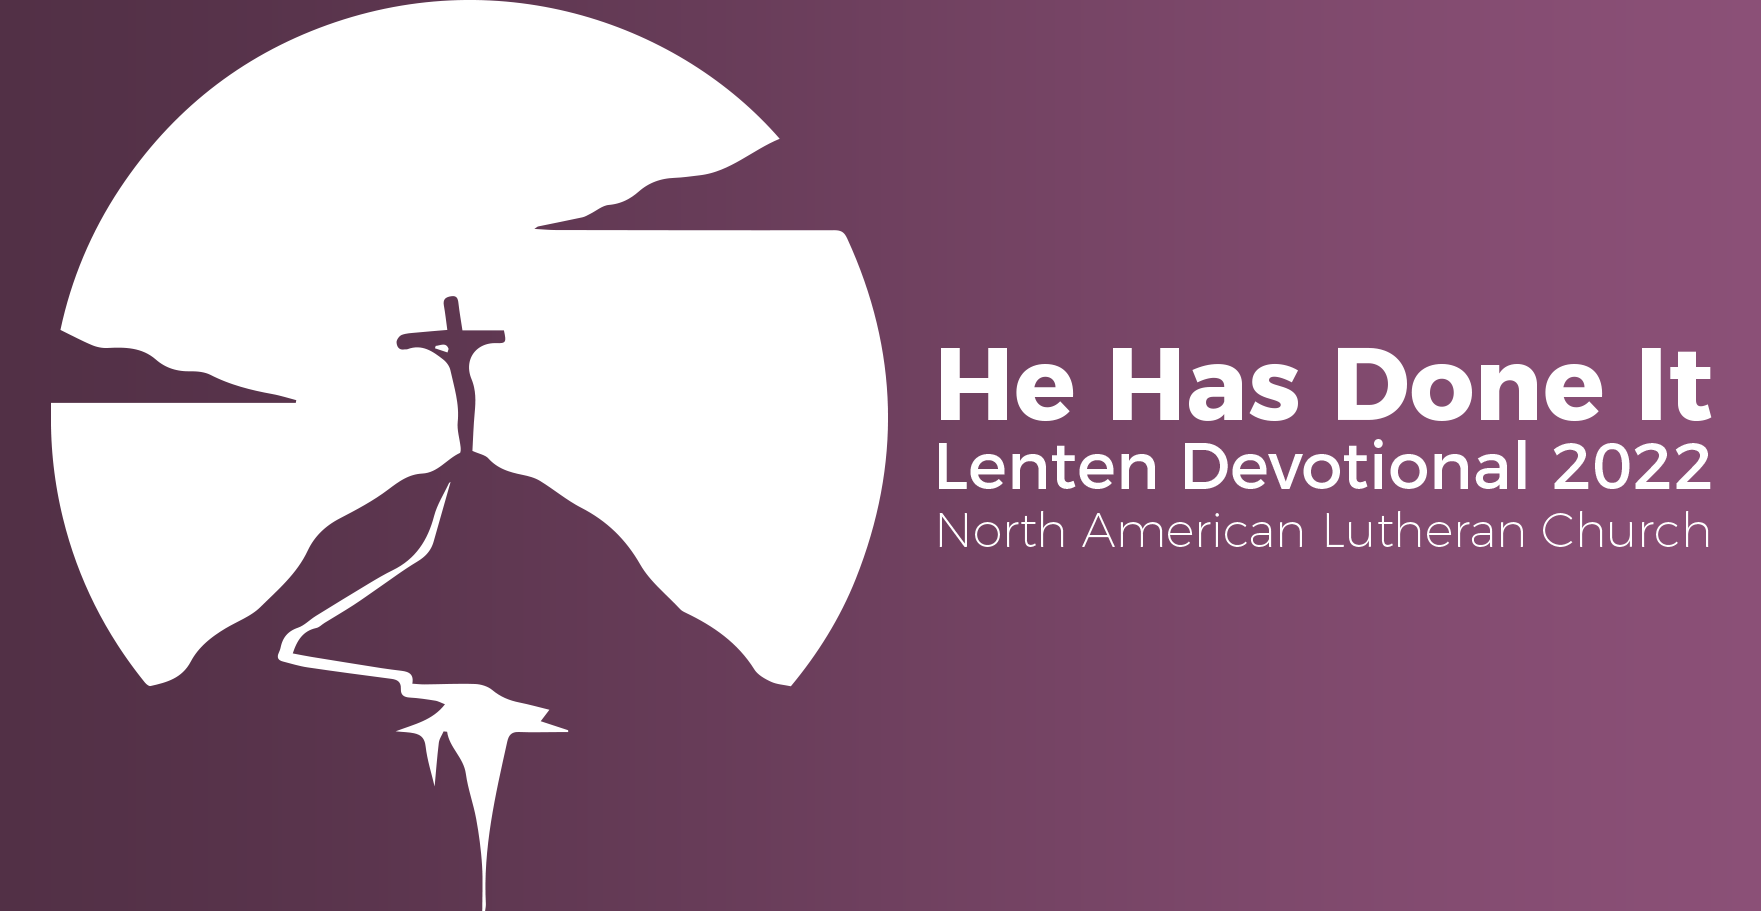 March 20, 2022 | The Third Sunday in Lent